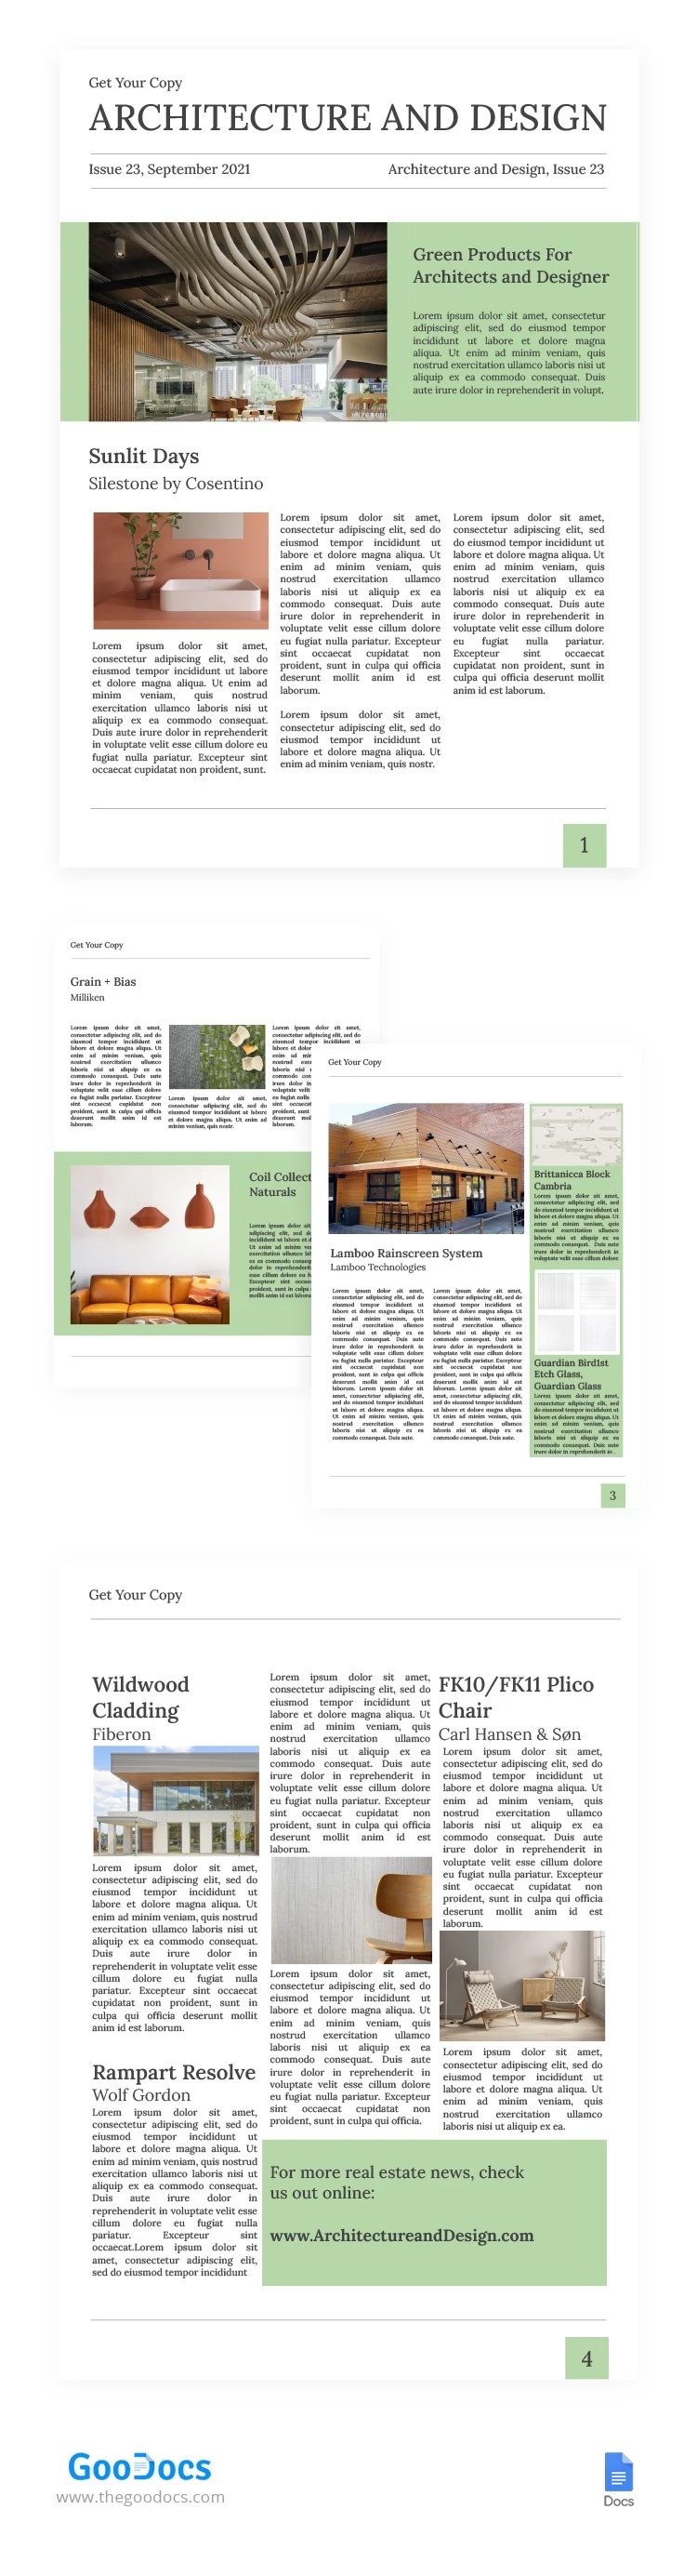 Architecture and Design Newspaper - free Google Docs Template - 10062407